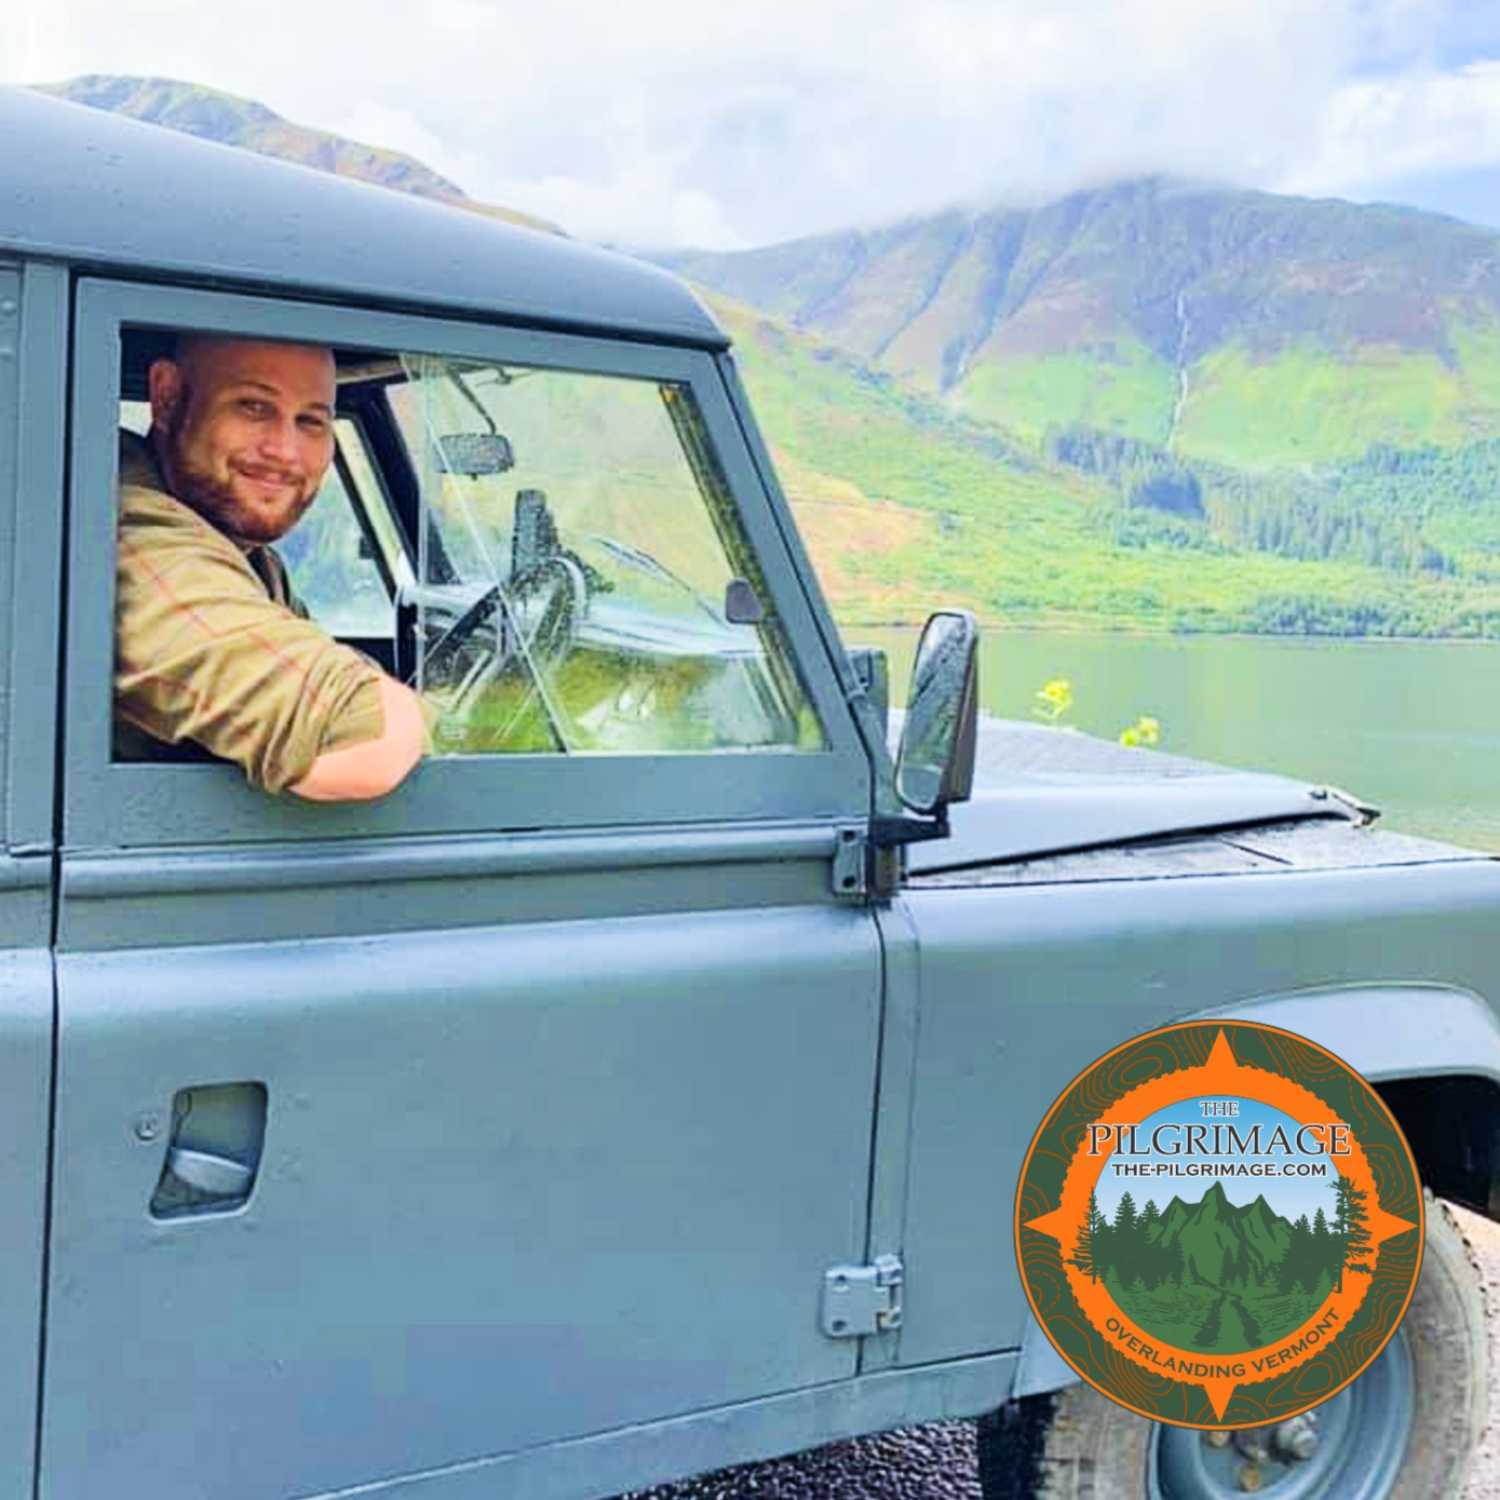 EP2 | Touring Scotland in a vintage Land Rover, Fire Safety, Upcoming Pilgrimage Events